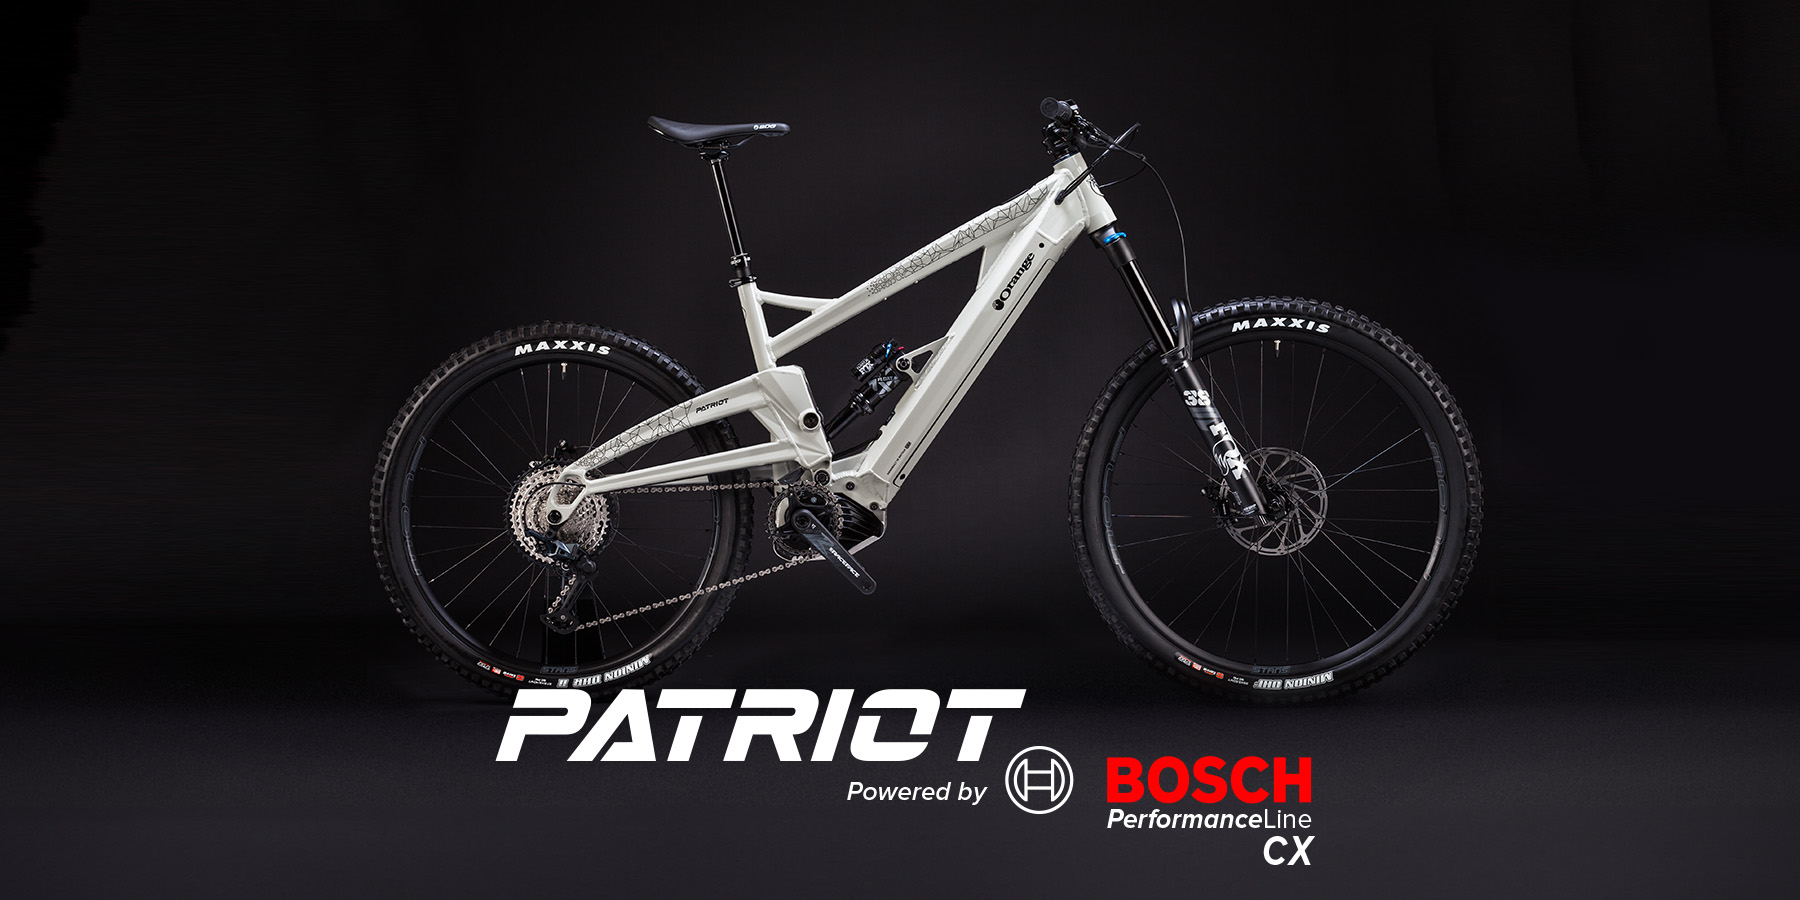 The brand new Patriot EPB with Bosch 